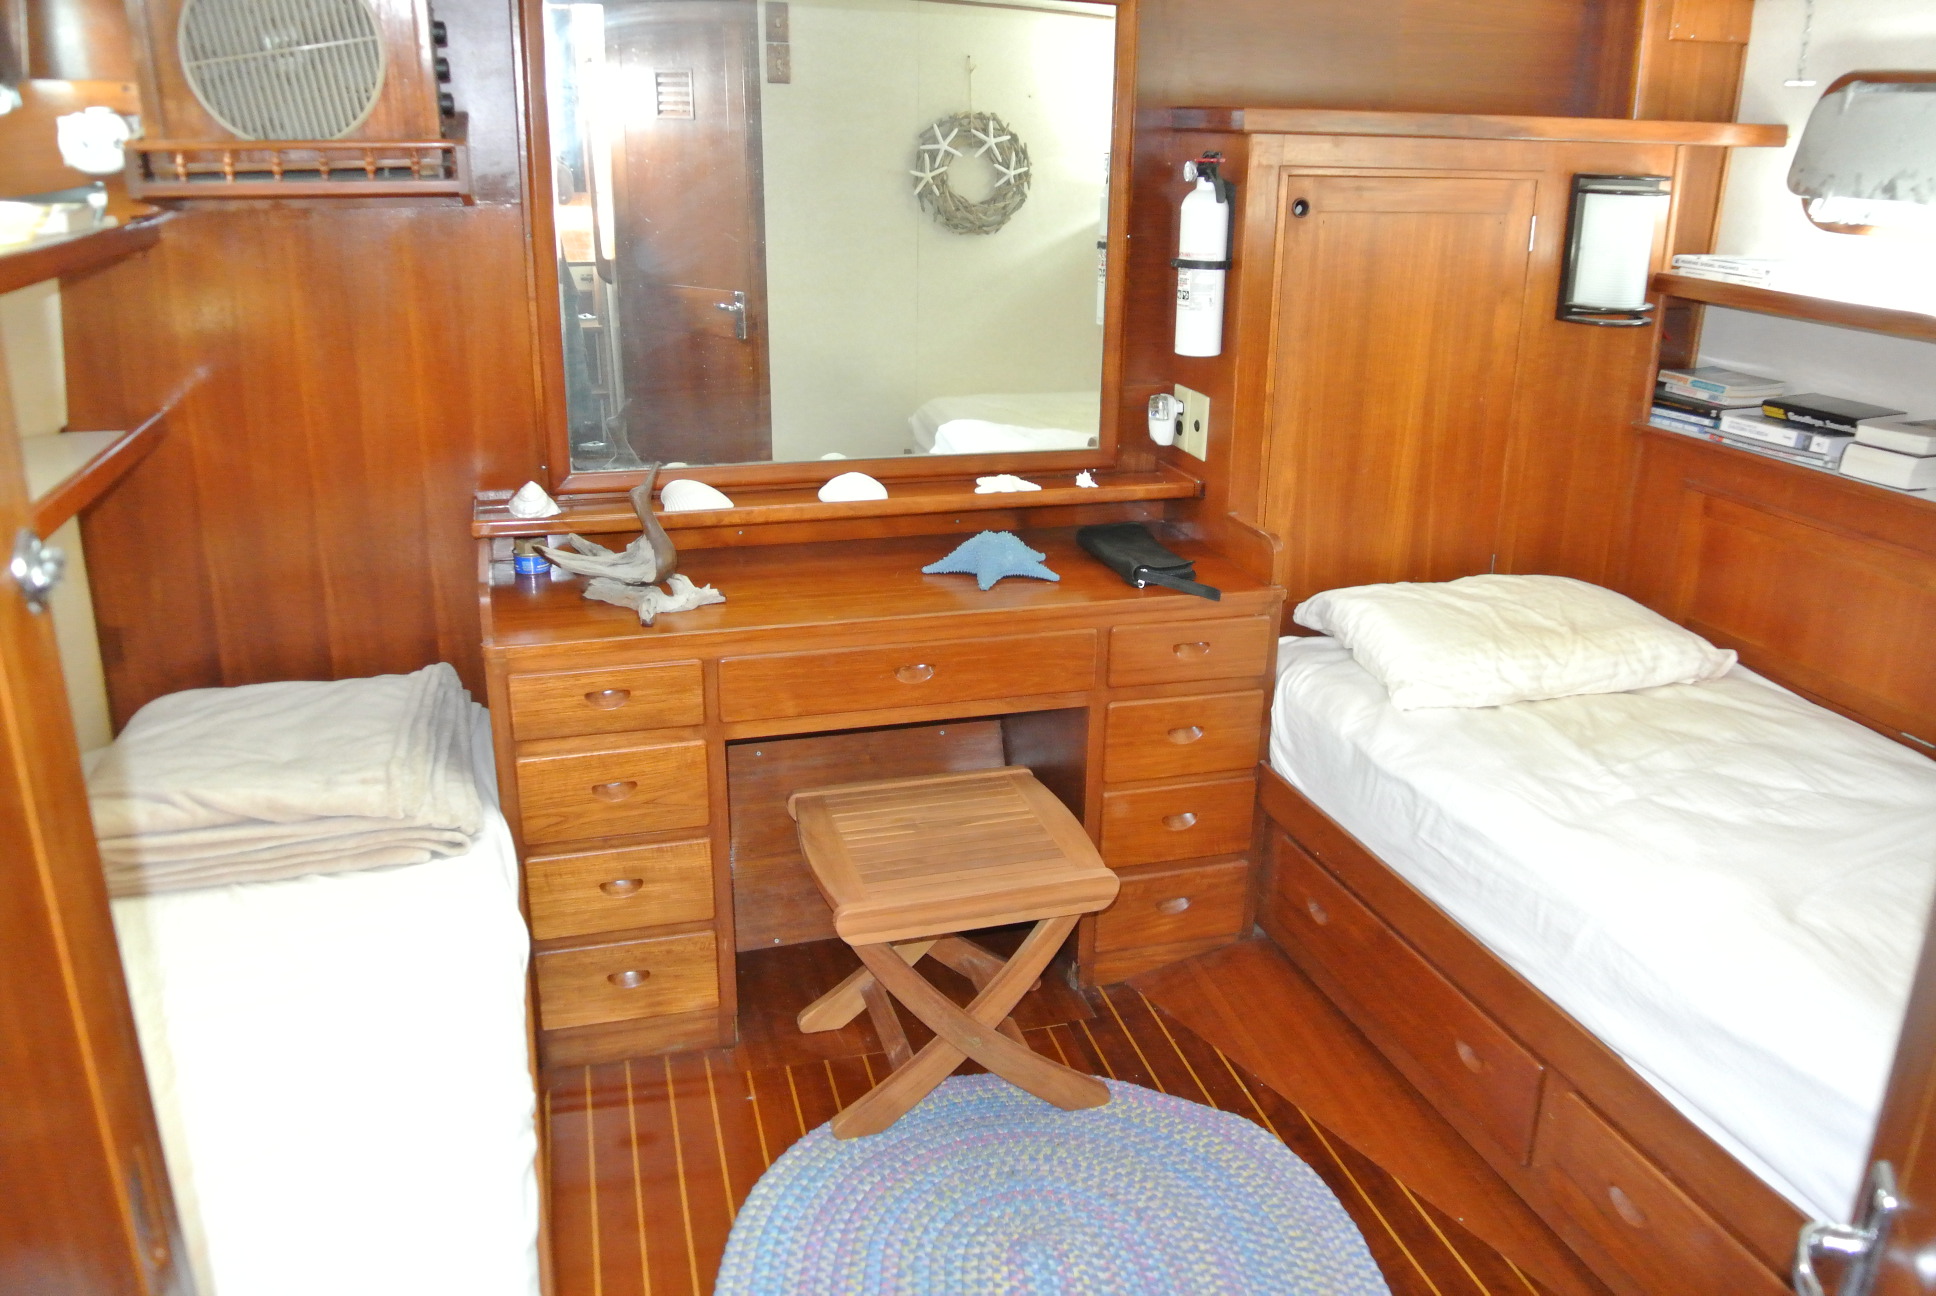 The master stateroom aft. When I was a young guy I didn't get twins at all, but now that I'm uh "older" I TOTALLY get it. My wife and I have separate bedrooms at the house. 